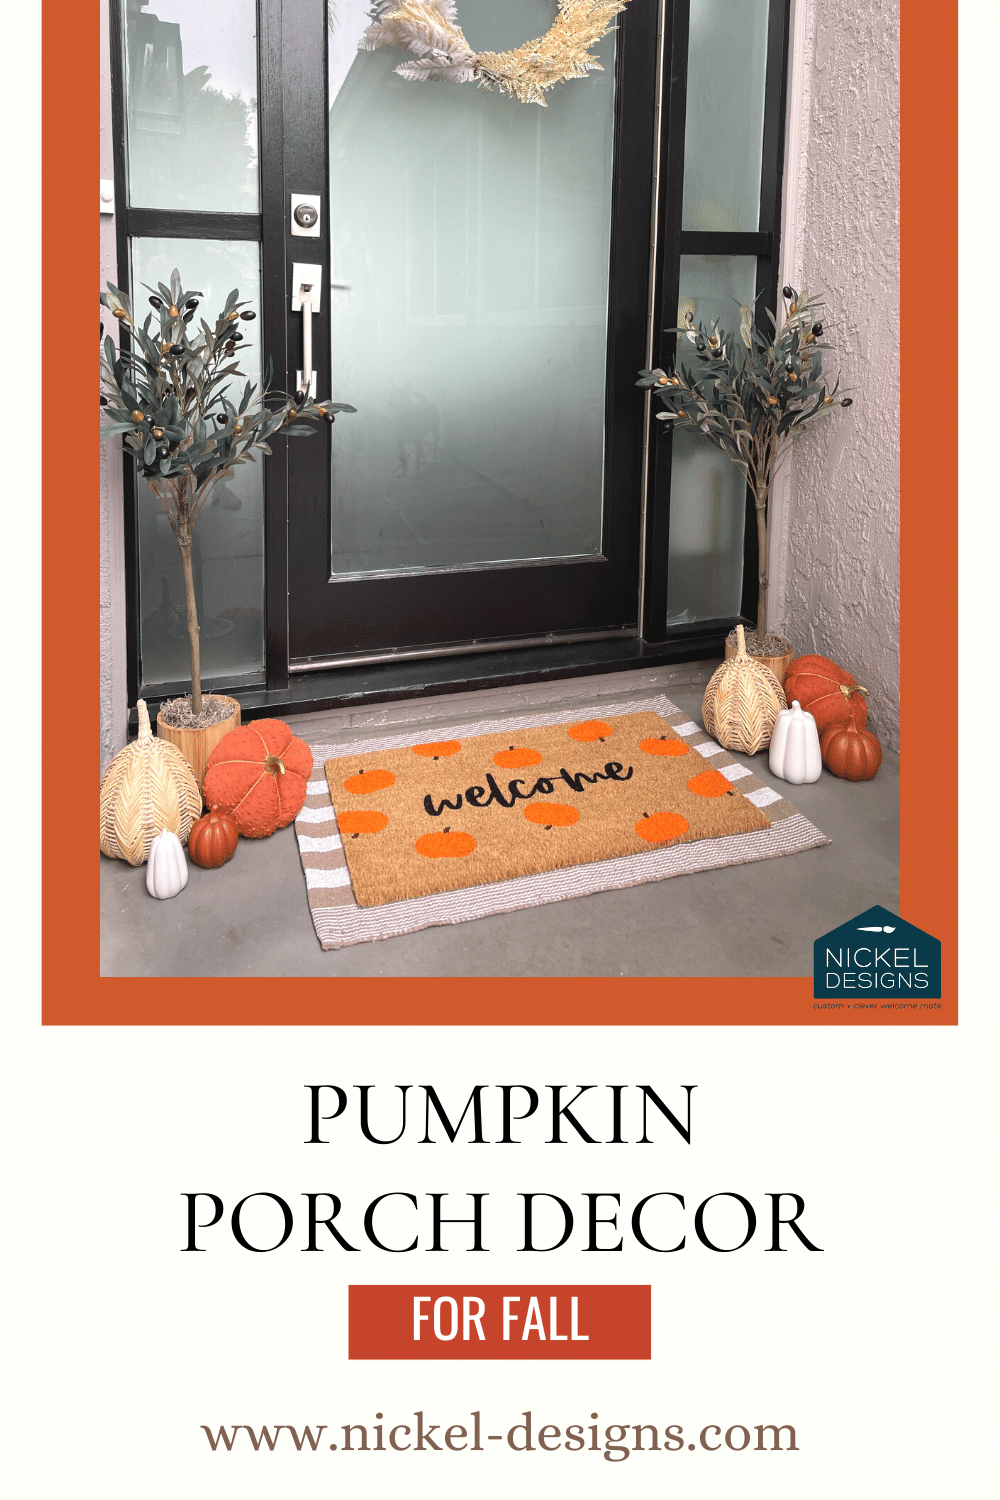 My Favorite Pumpkin Doormats for your fall porch!